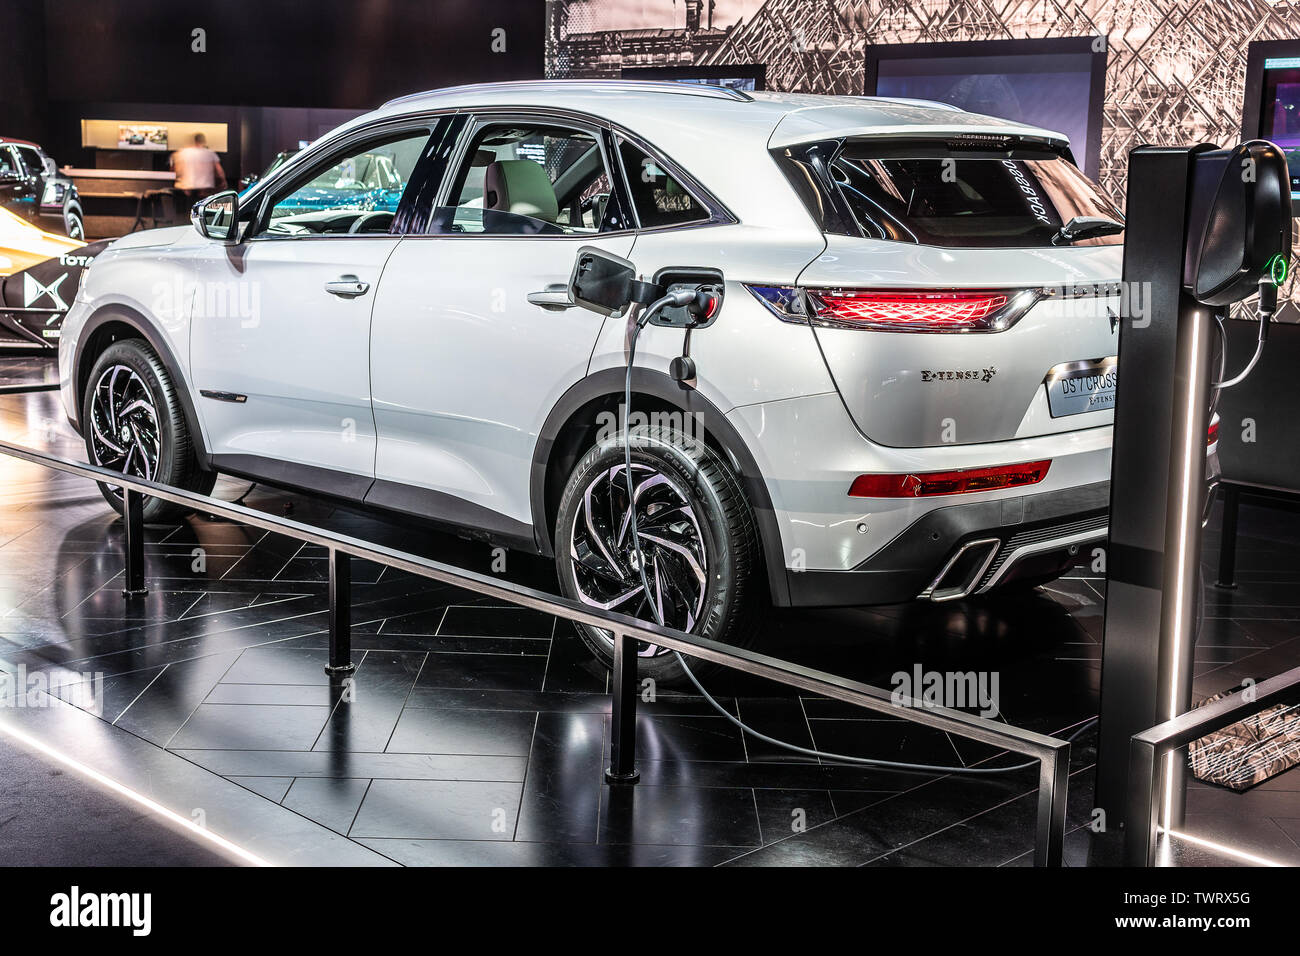 Paris, France, Oct 09, 2018 Citroen DS 7 Crossback E-Tense 4x4 Plug-In Hybrid at Mondial Paris Motor Show, SUV car produced by French Citroen DS Stock Photo